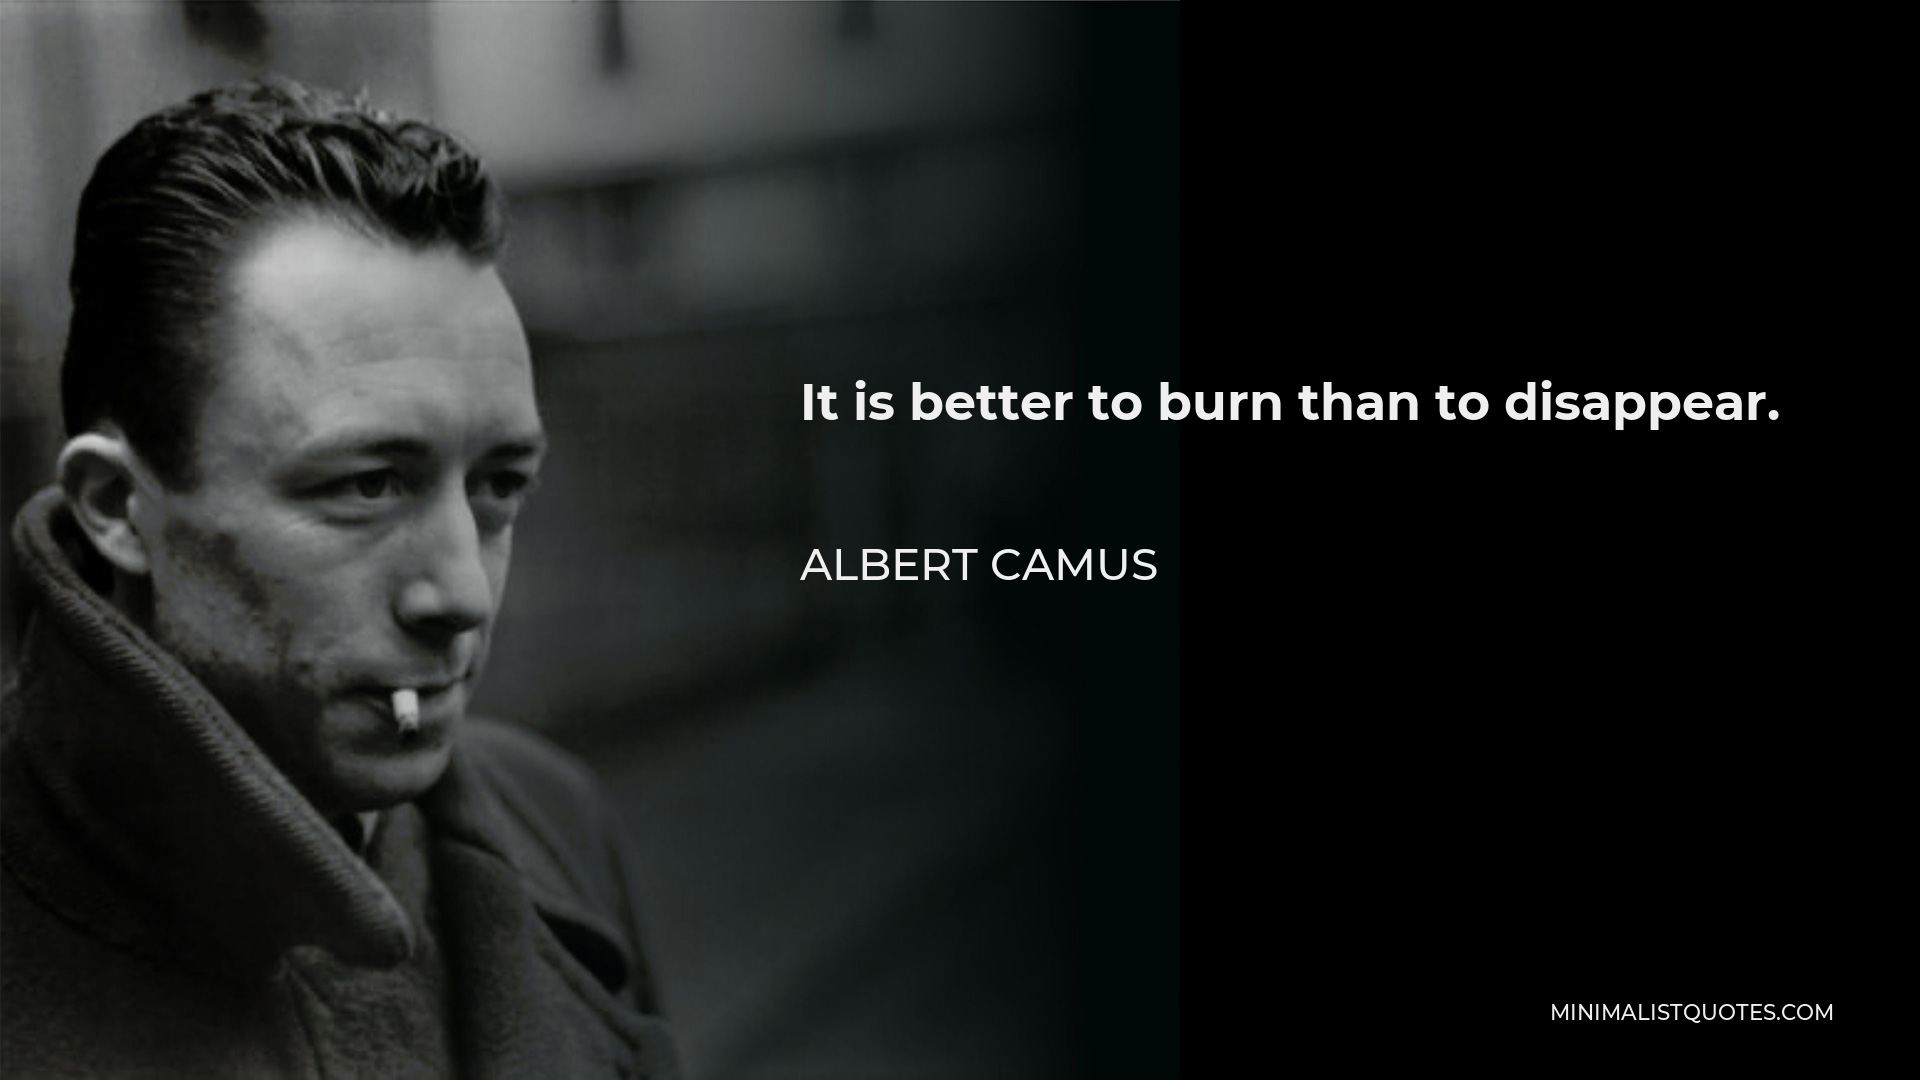 Albert Camus Quote - It is better to burn than to disappear.